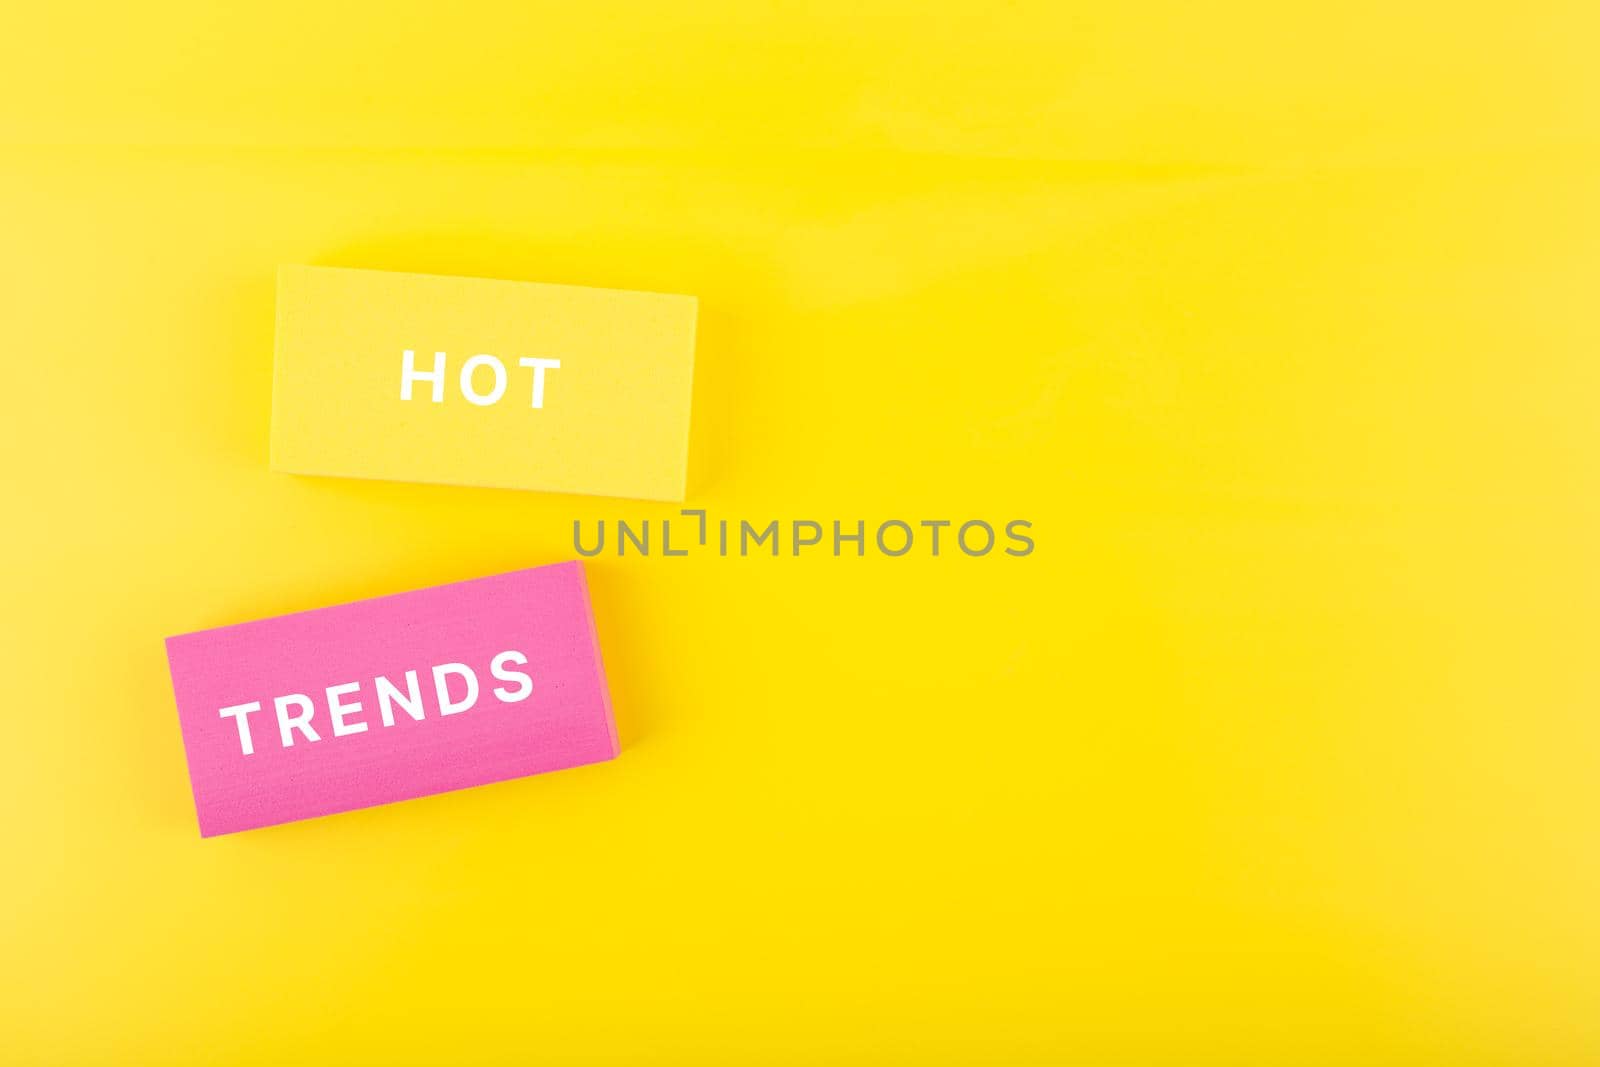 Hot trends written on yellow and pink rectangles on bright yellow background with copy space. Concept of newest, latest, hot and popular trends of 2022